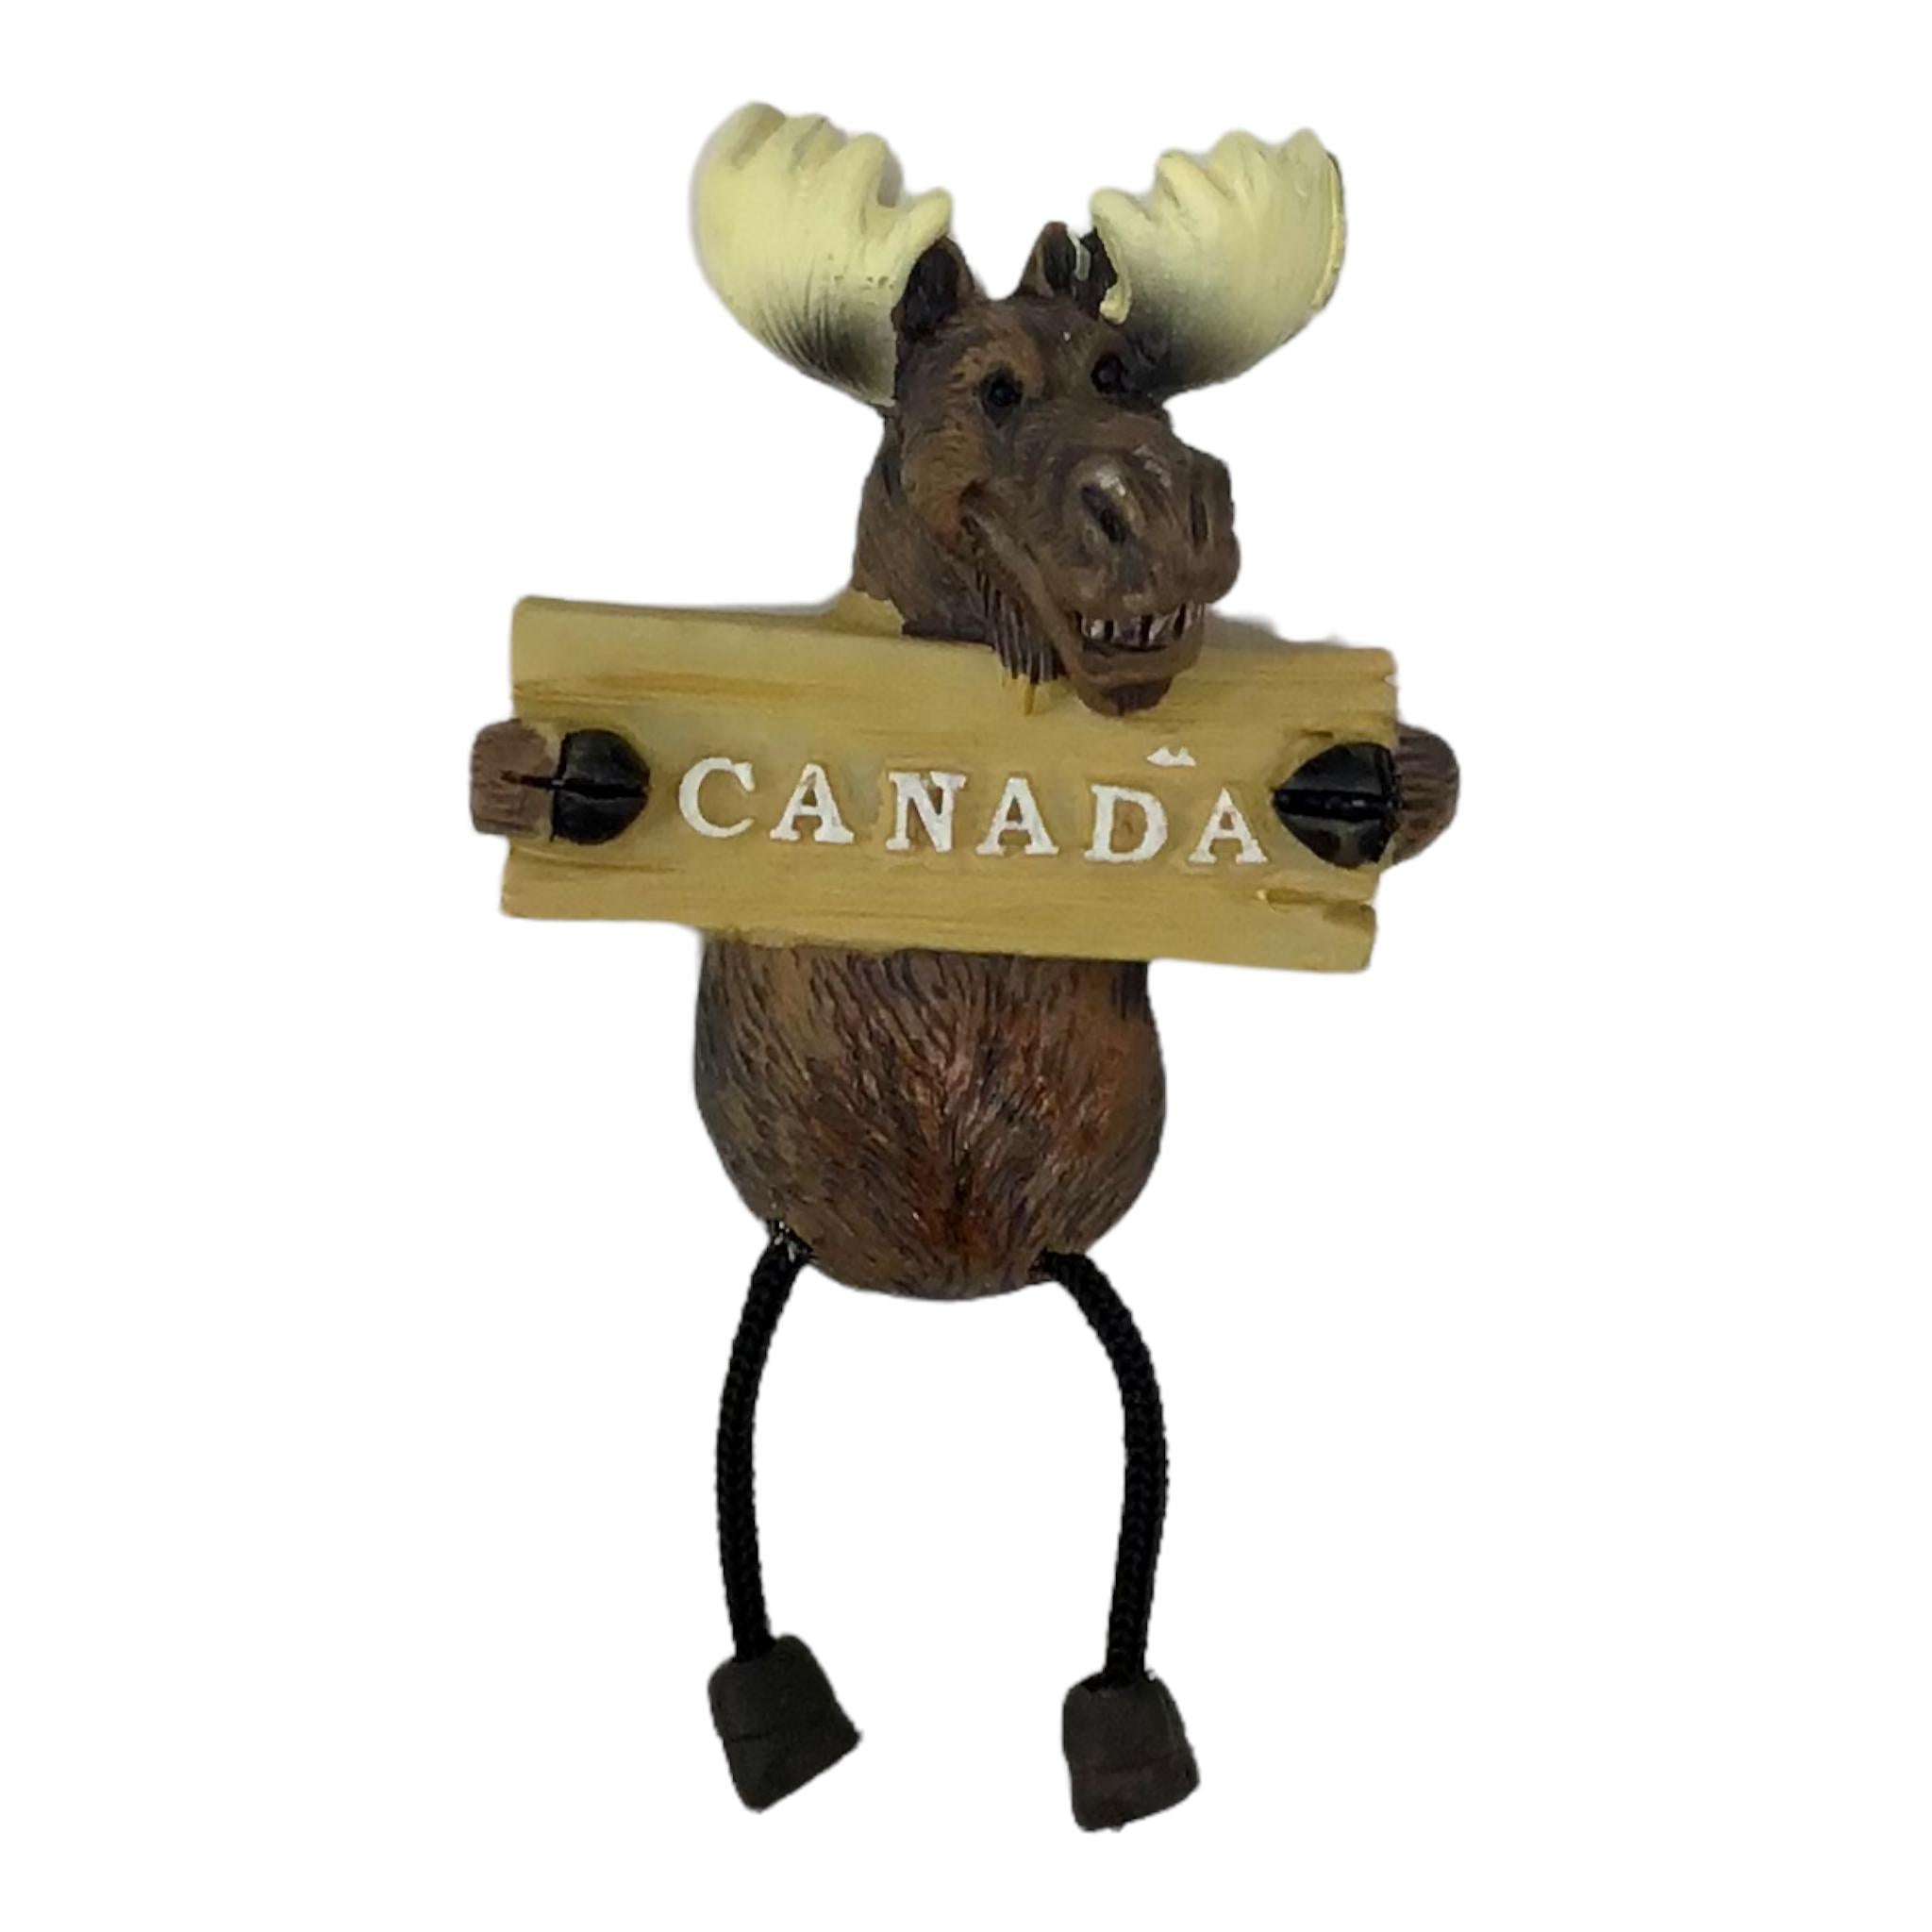 Canada moose magnet holding Canada board sign